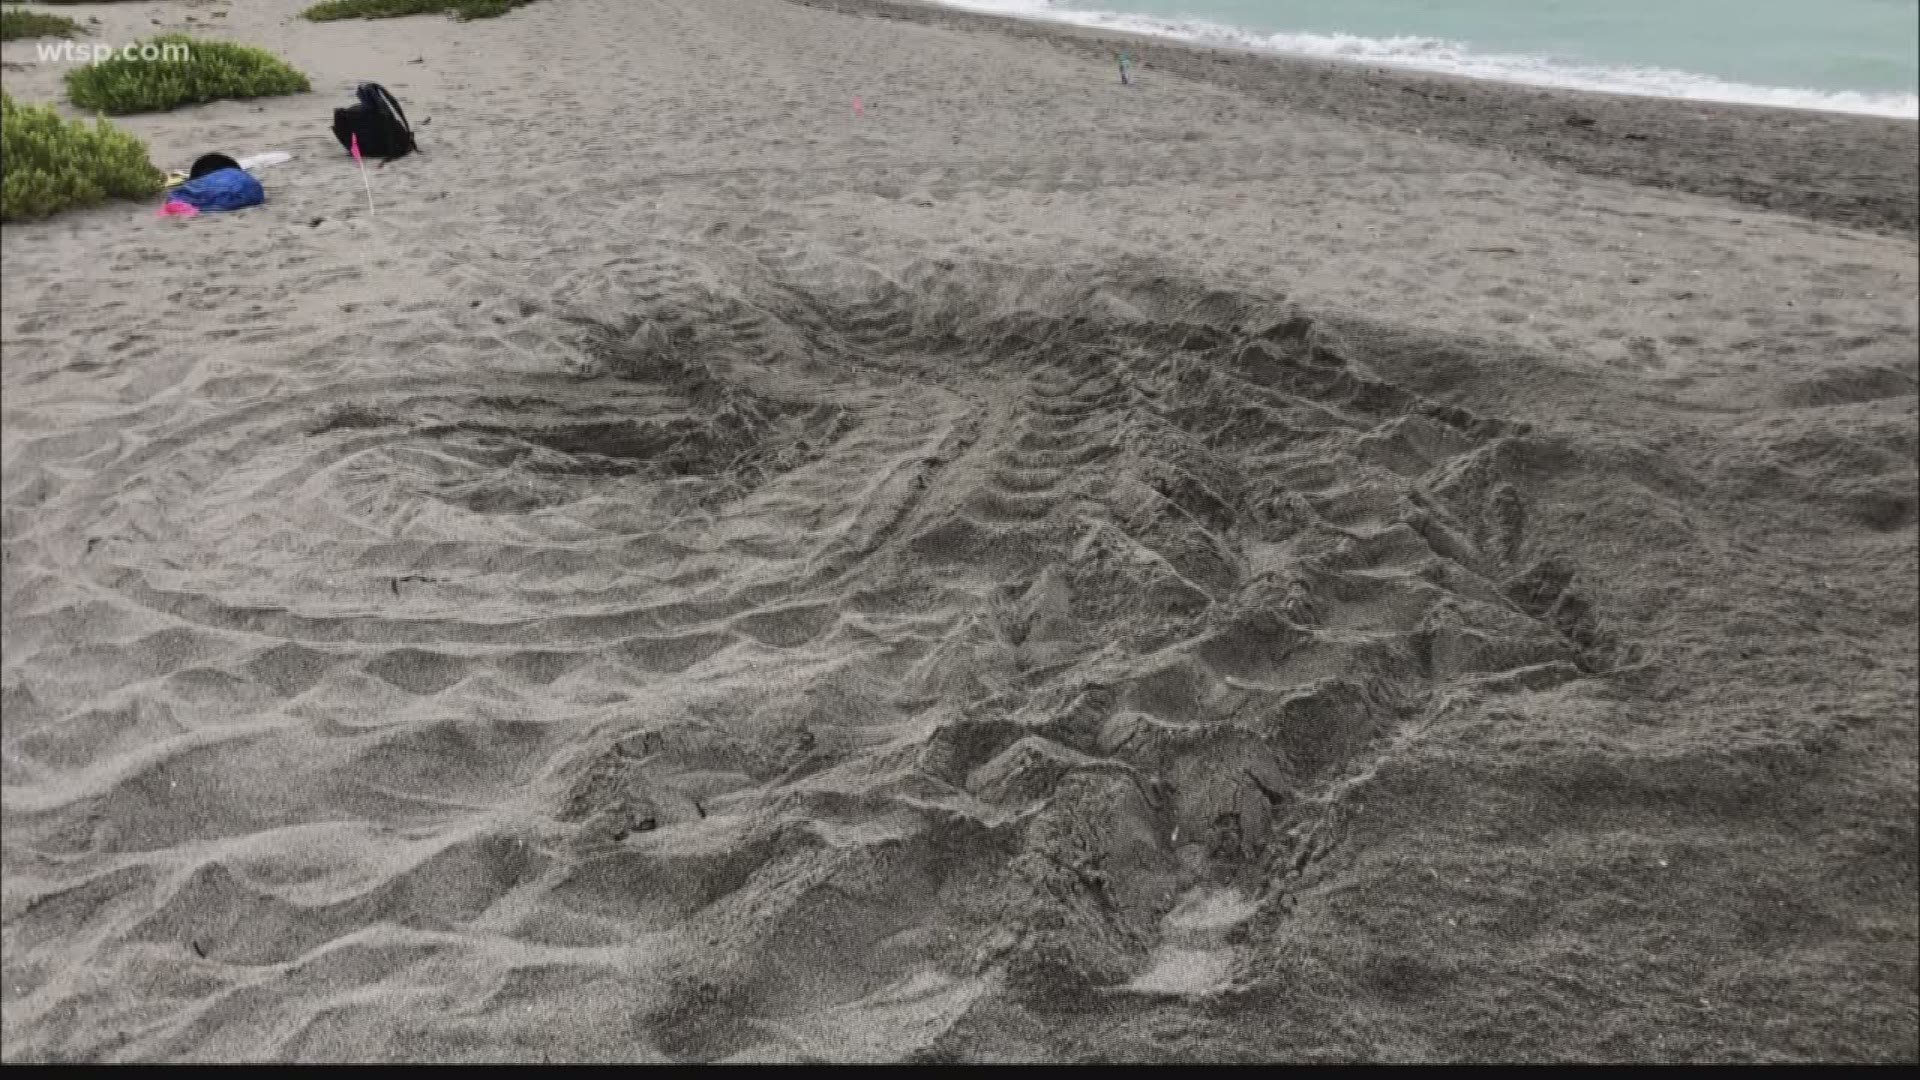 Two rare leatherback turtles have taken up residence right here in Sarasota. Two big nests prove it. 

These vulnerable animals typically nest on the east coast. It’s a big find, especially since turtle nesting season is just eight days old.